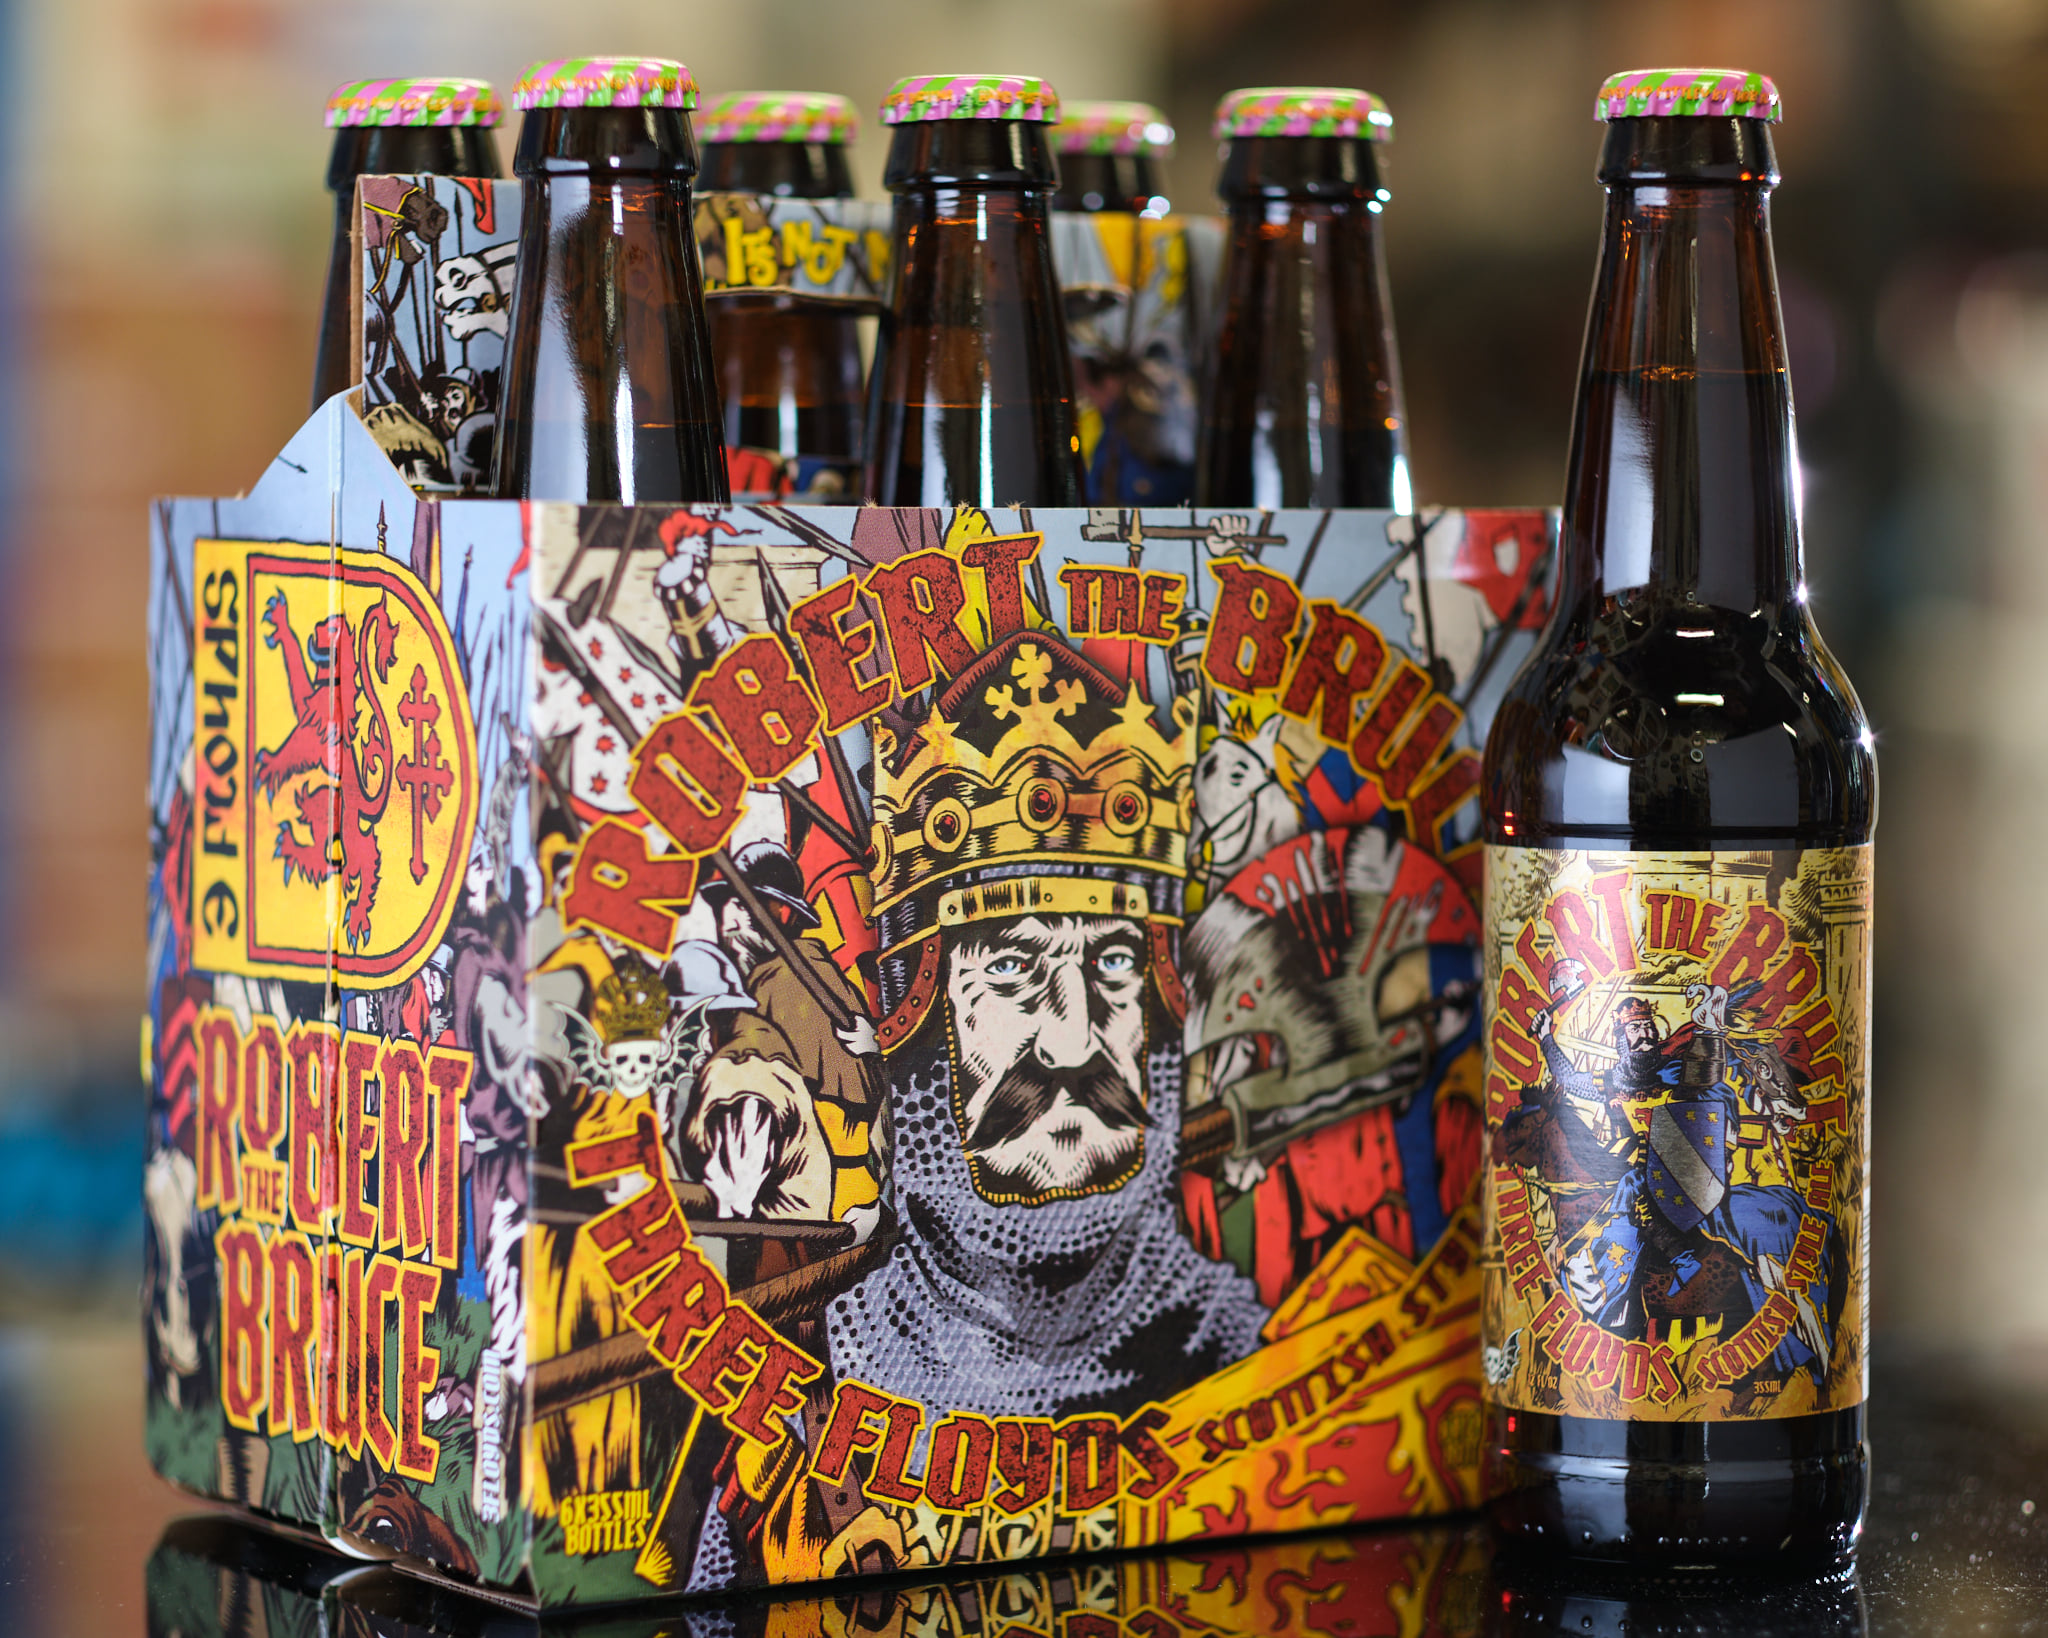 Home - 3 Floyds Brewing